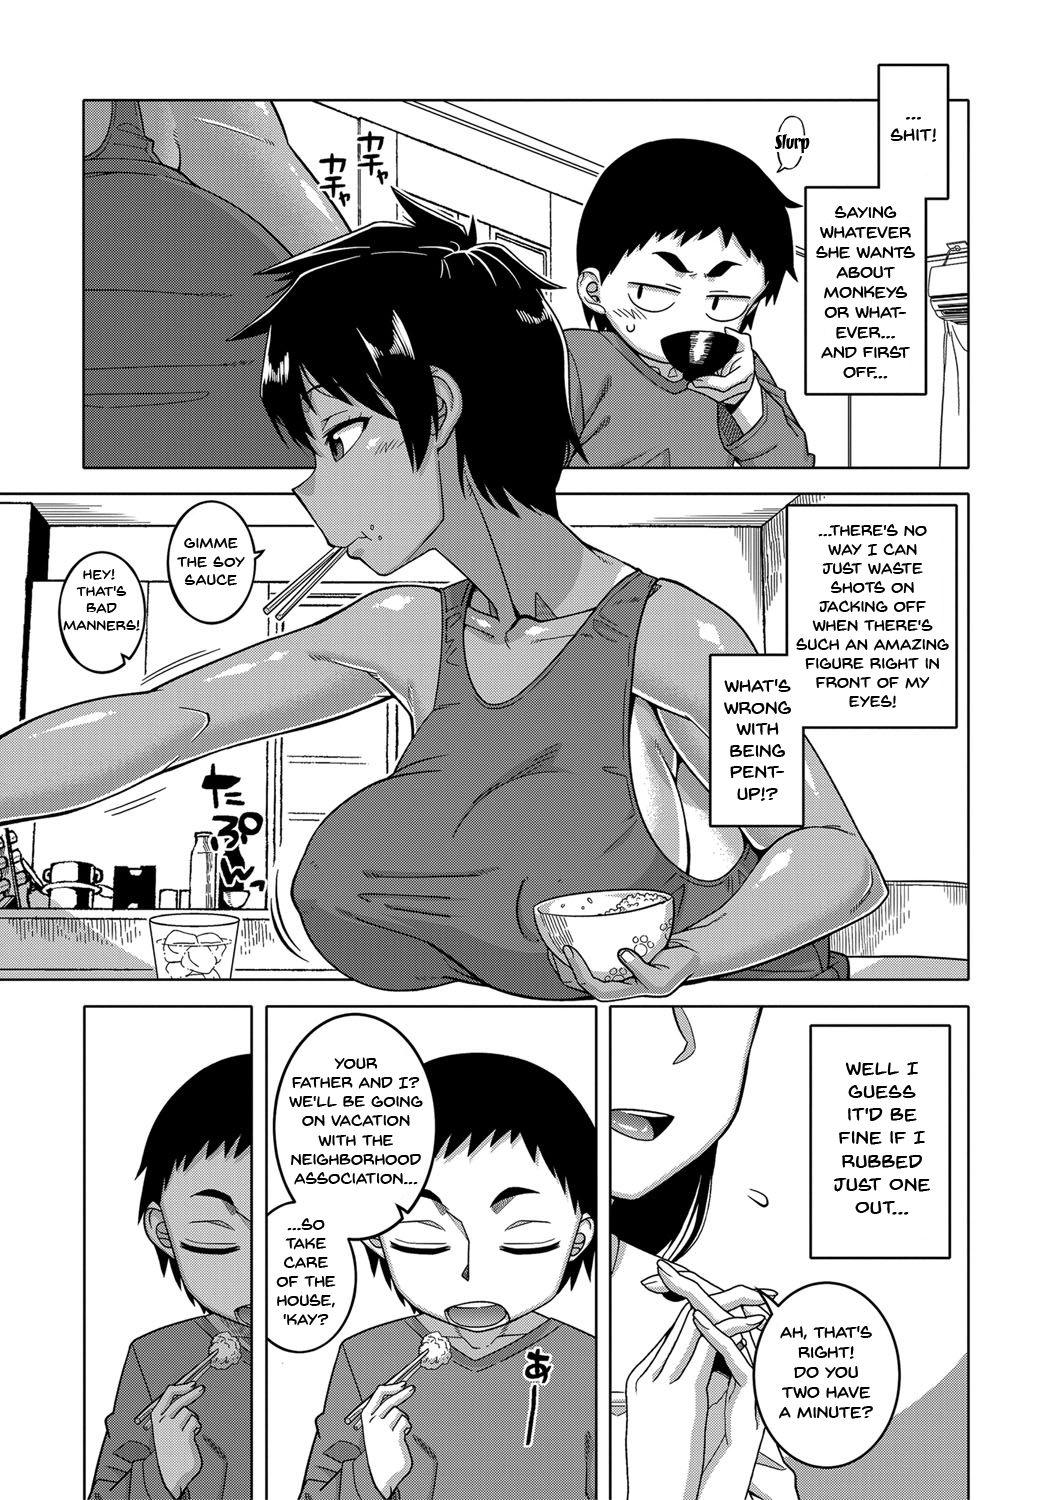 Juicy Chotto Bijin de Mune ga Dekakute Eroi dake no Baka Nee | My Stupid Older Sister Who's Just a Bit Hot Because Of Her Large Breasts Ch. 2 Stepbrother - Page 5